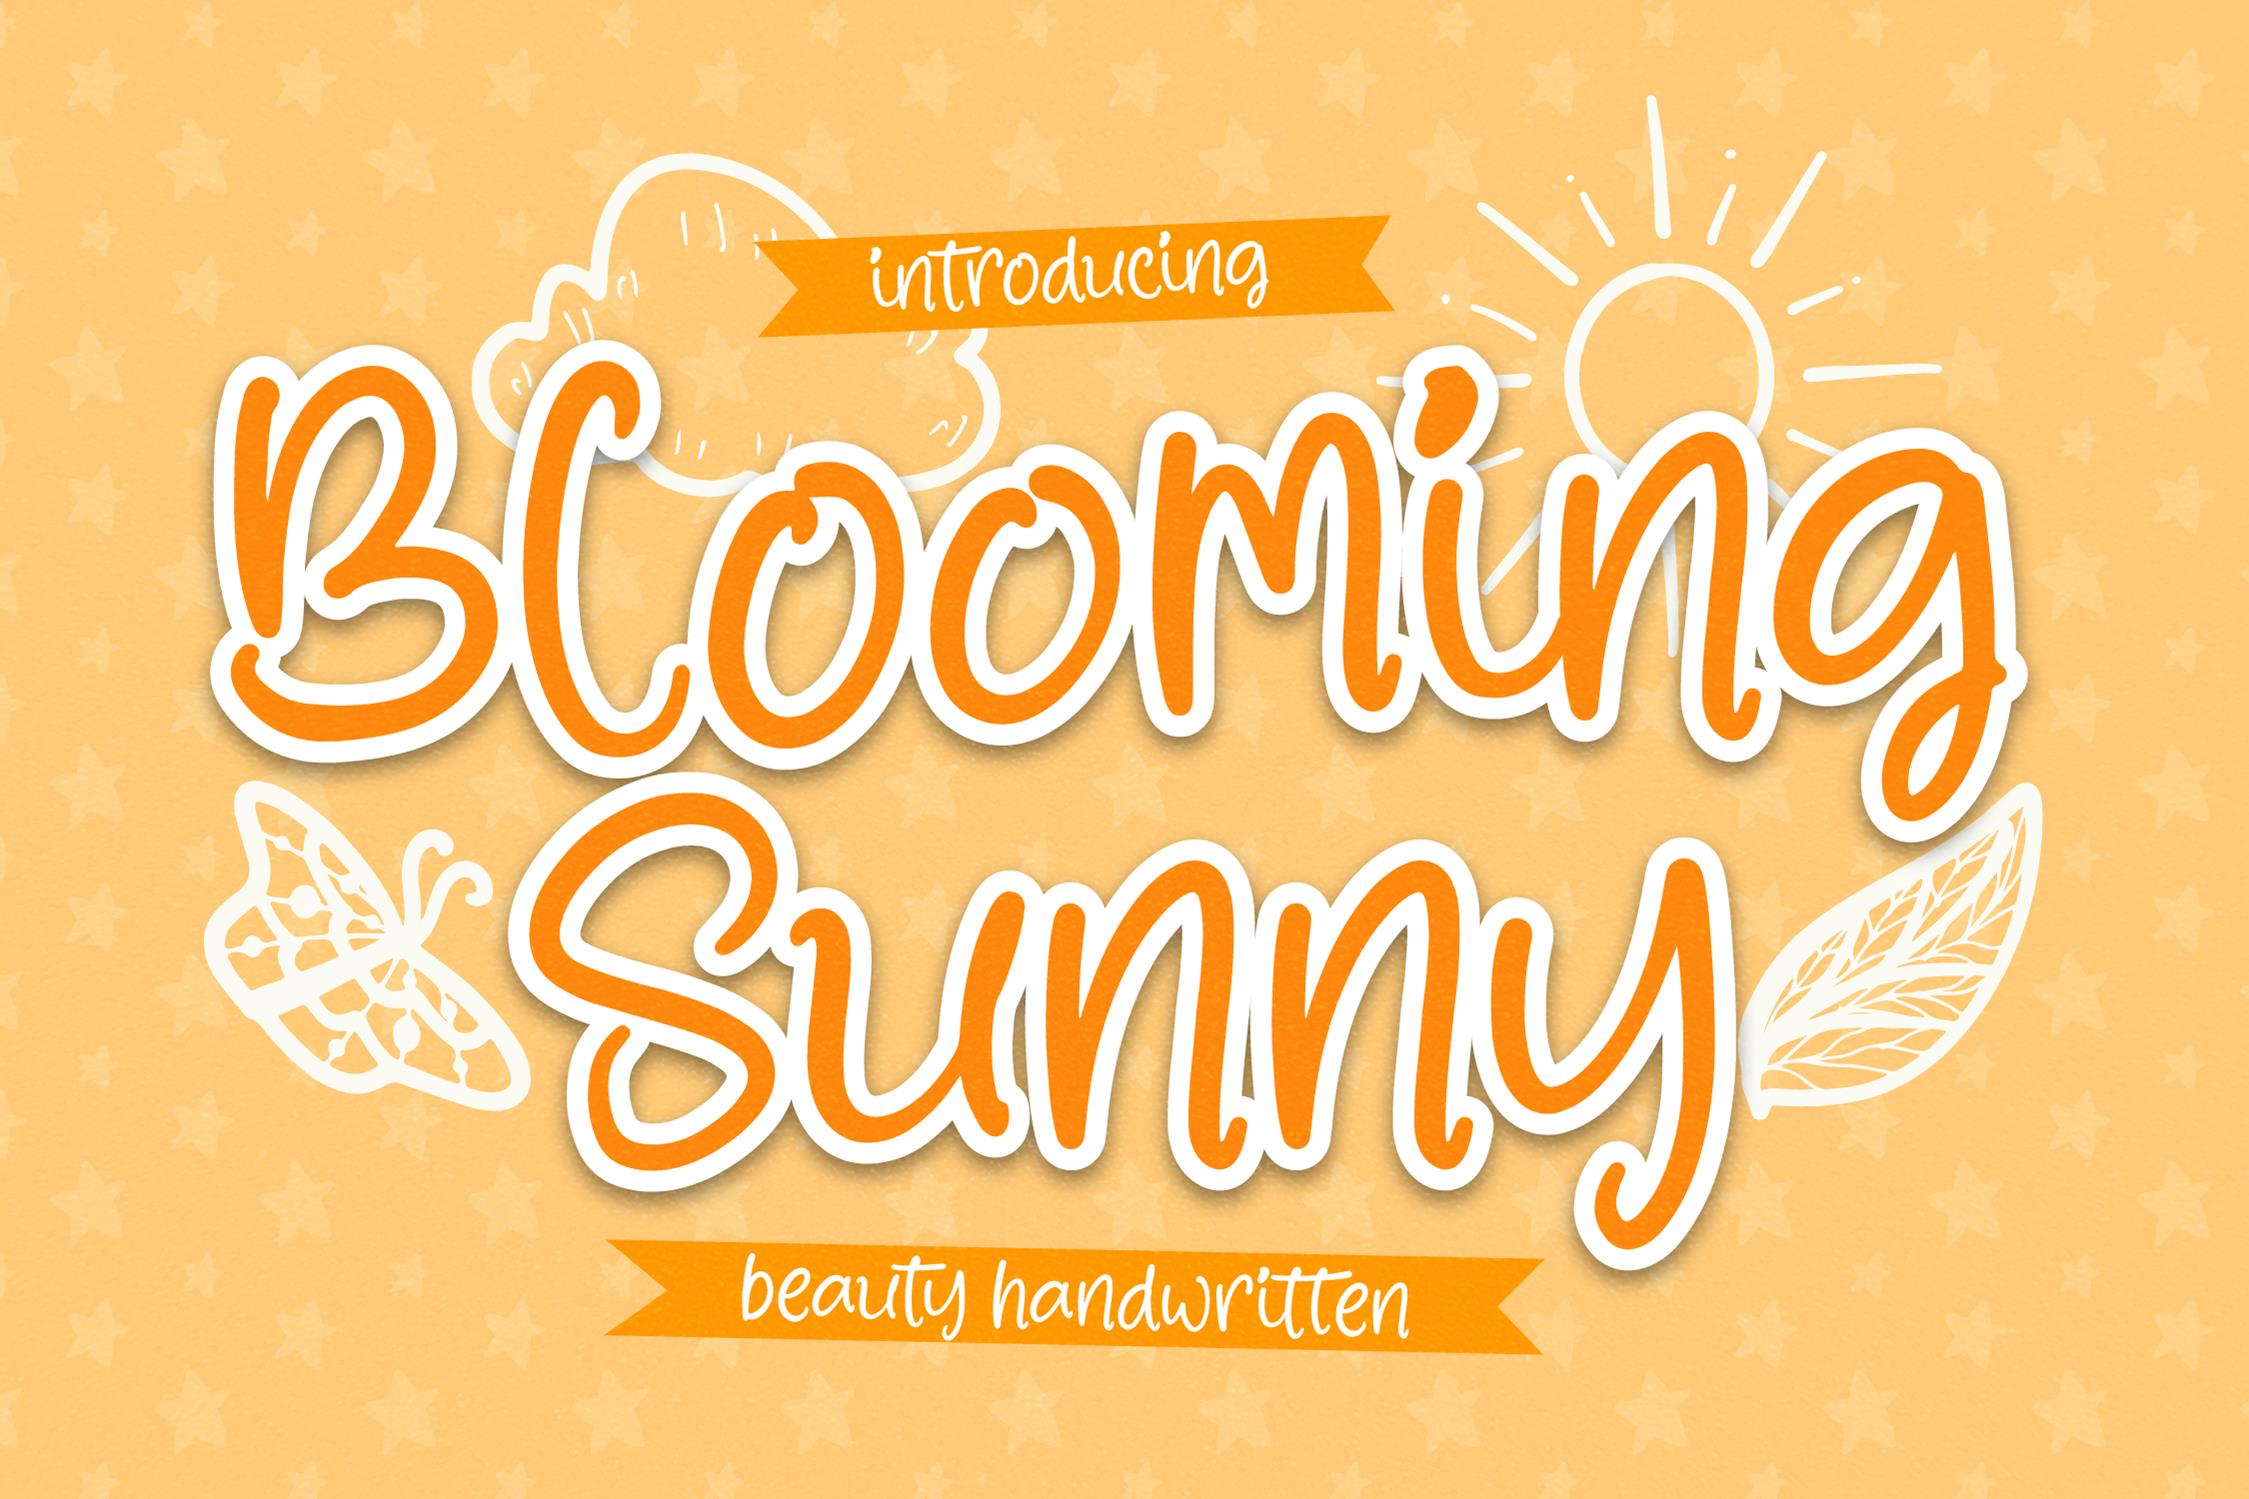 Blooming Sunny